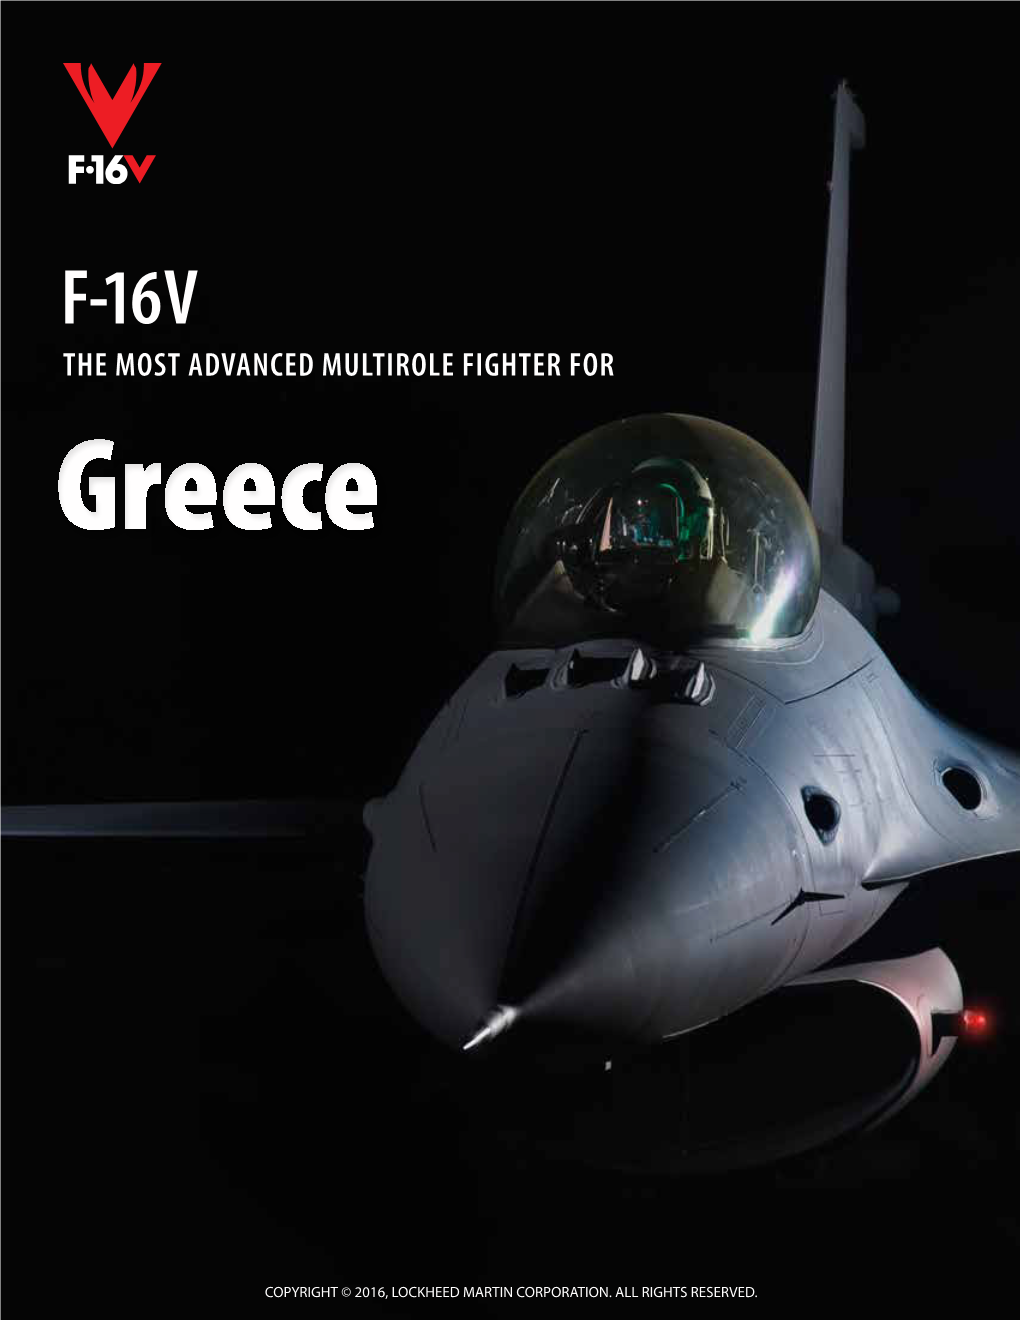 THE MOST ADVANCED MULTIROLE FIGHTER for Greece